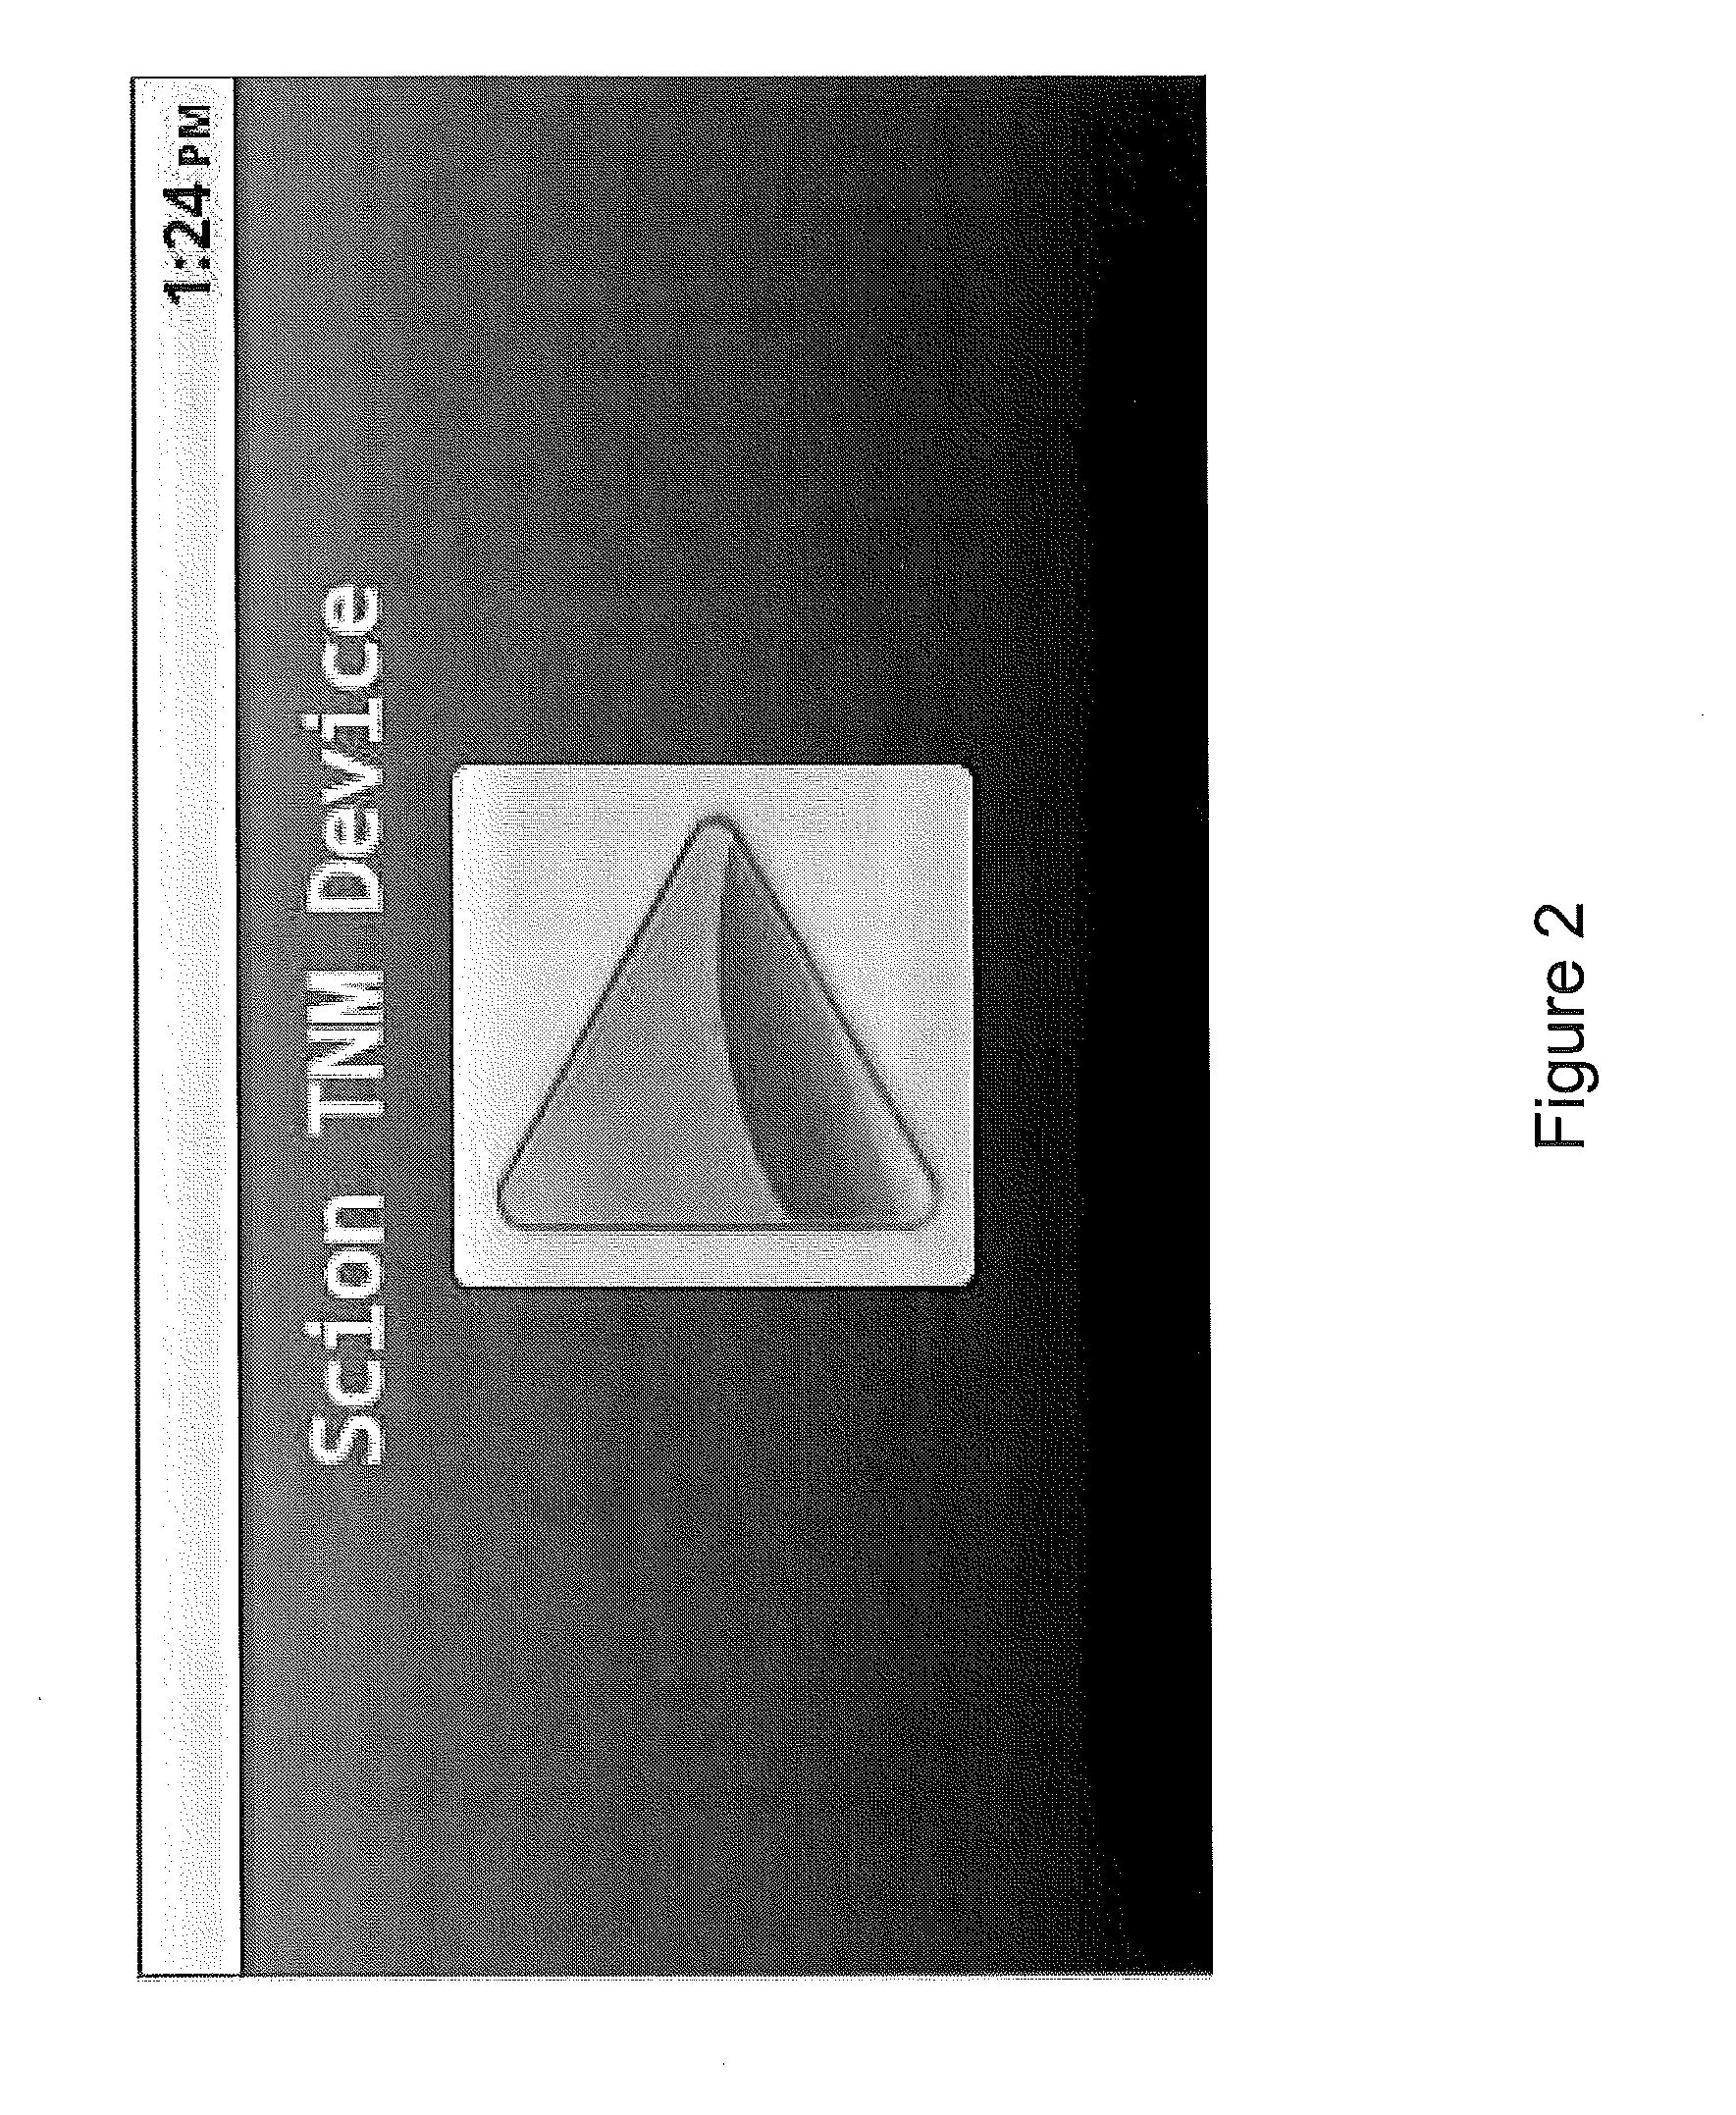 Systems, Methods and Apparatus for Delivering Nerve Stimulation to a Patient with Physician Oversight